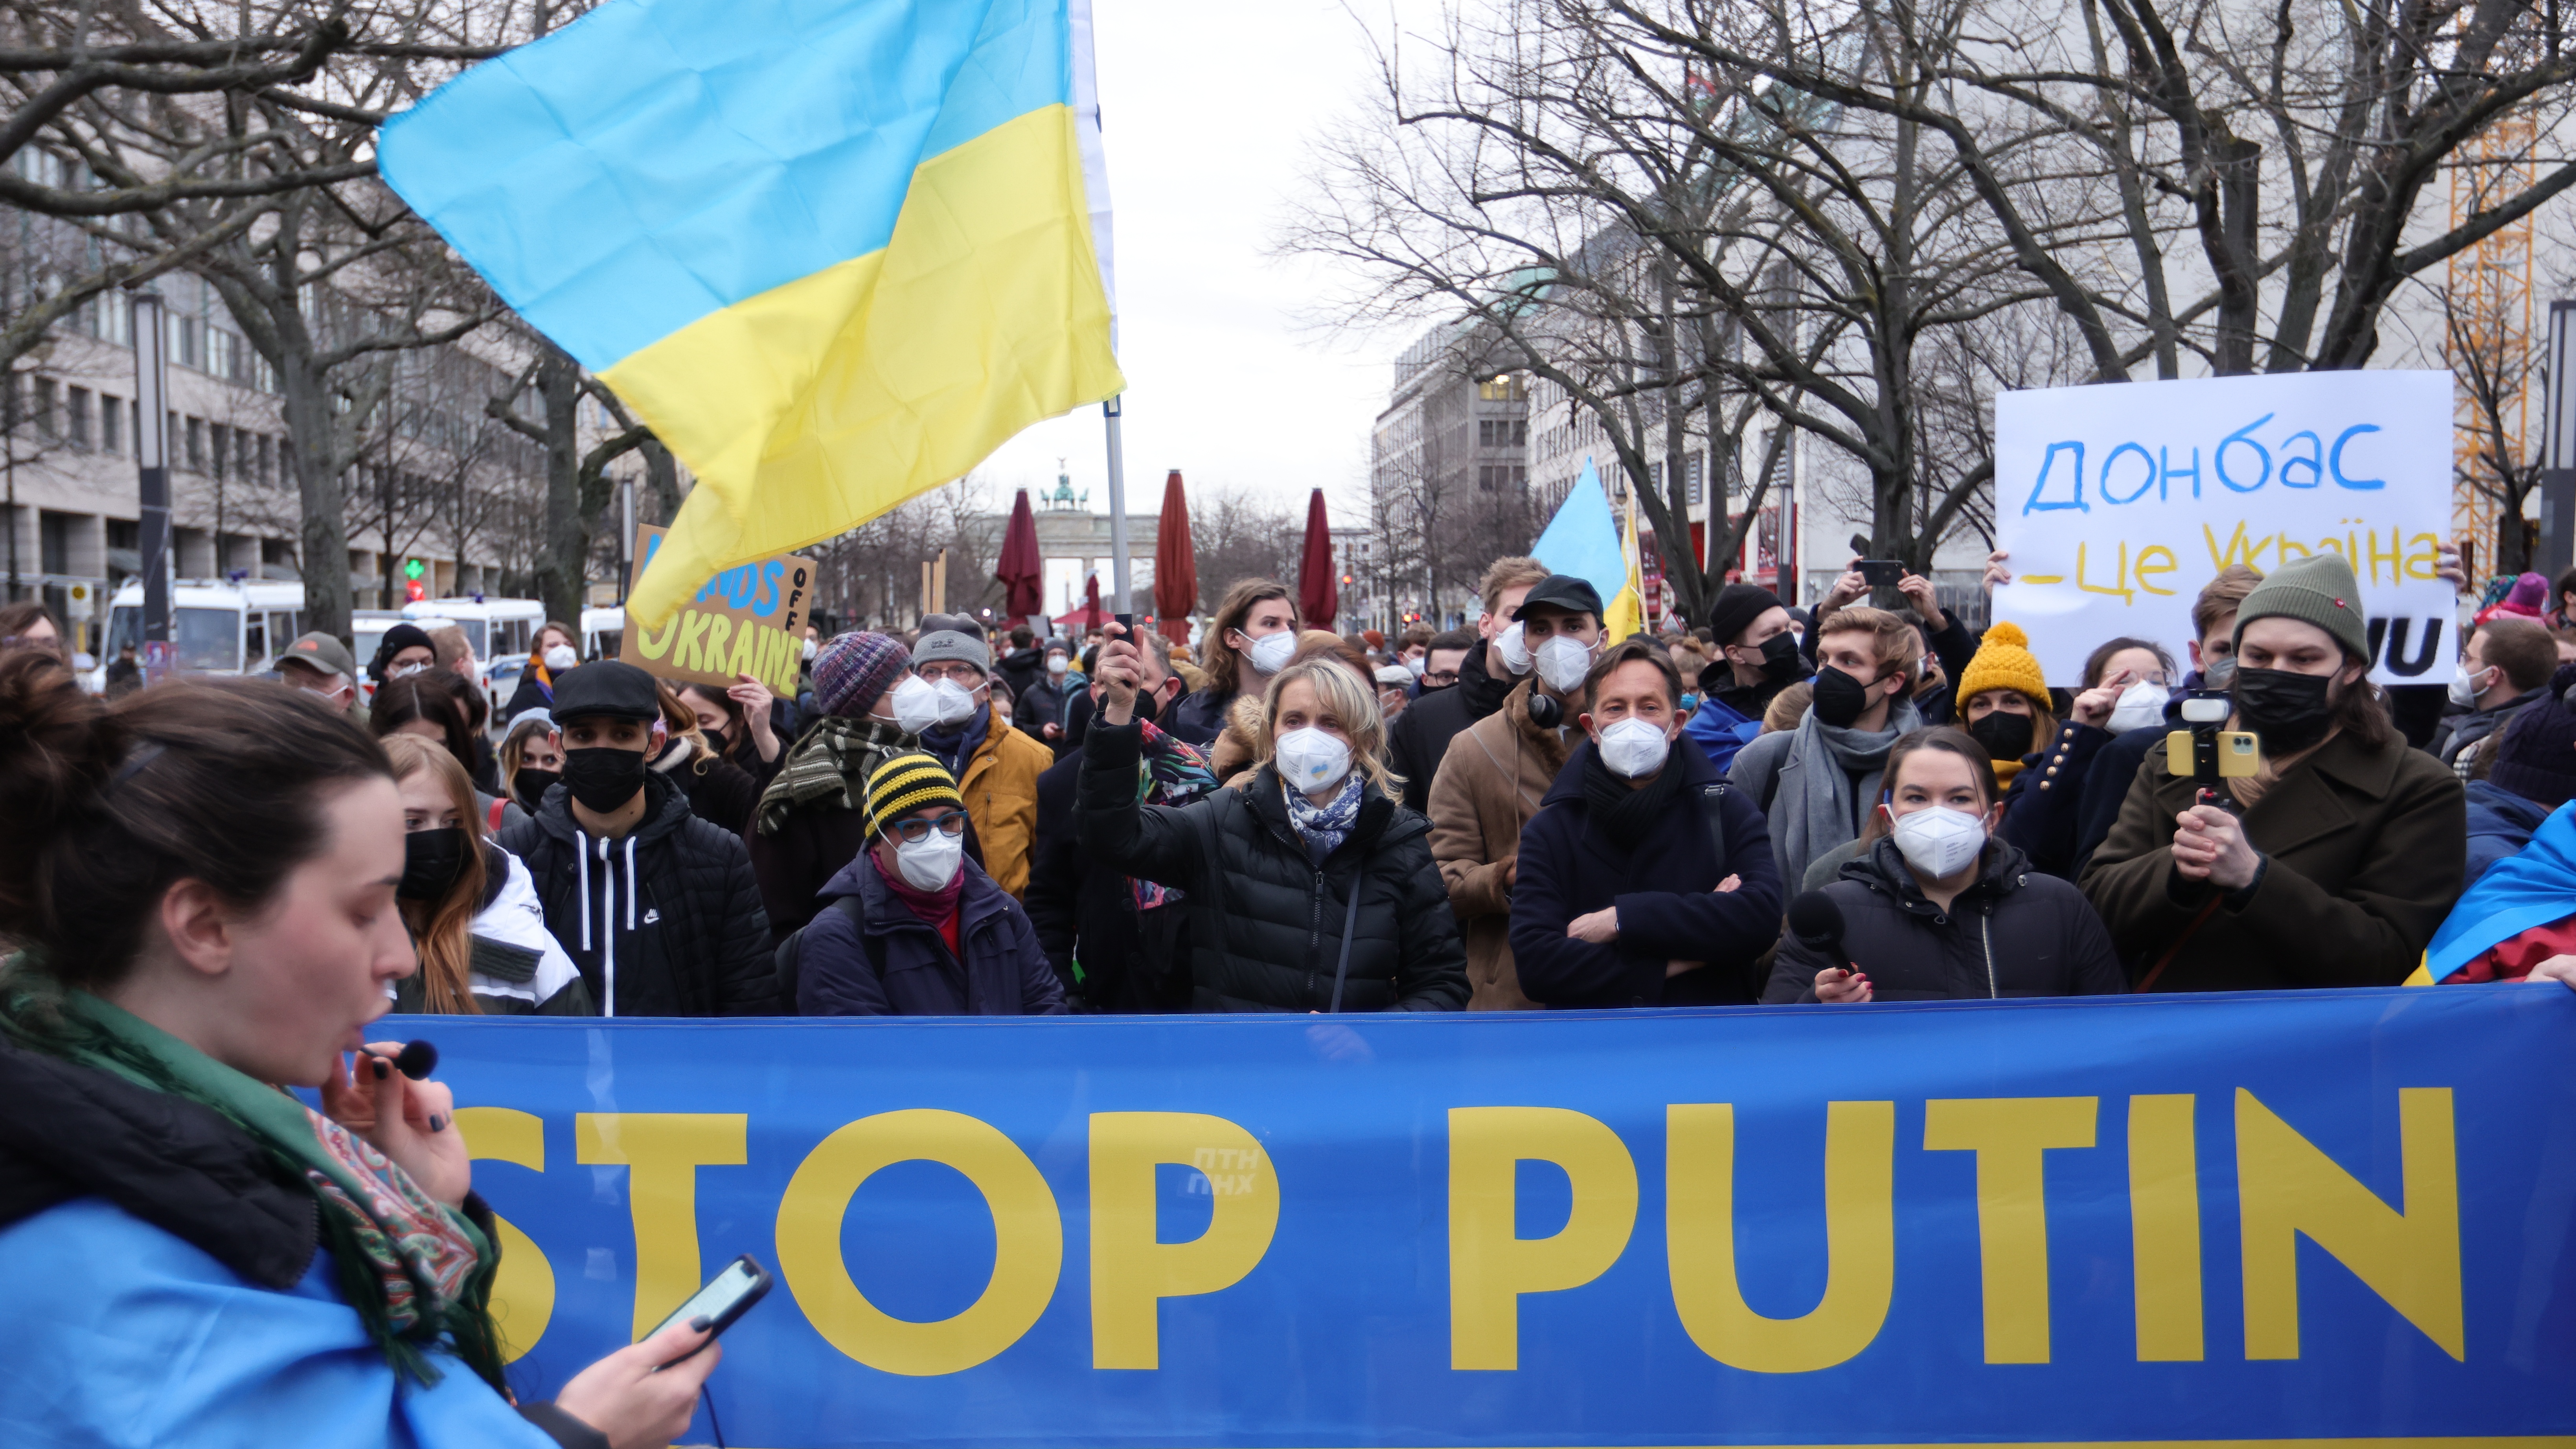 Protestors demonstrate against the deployment of troops in Ukraine outside the Russian embassy in Berlin